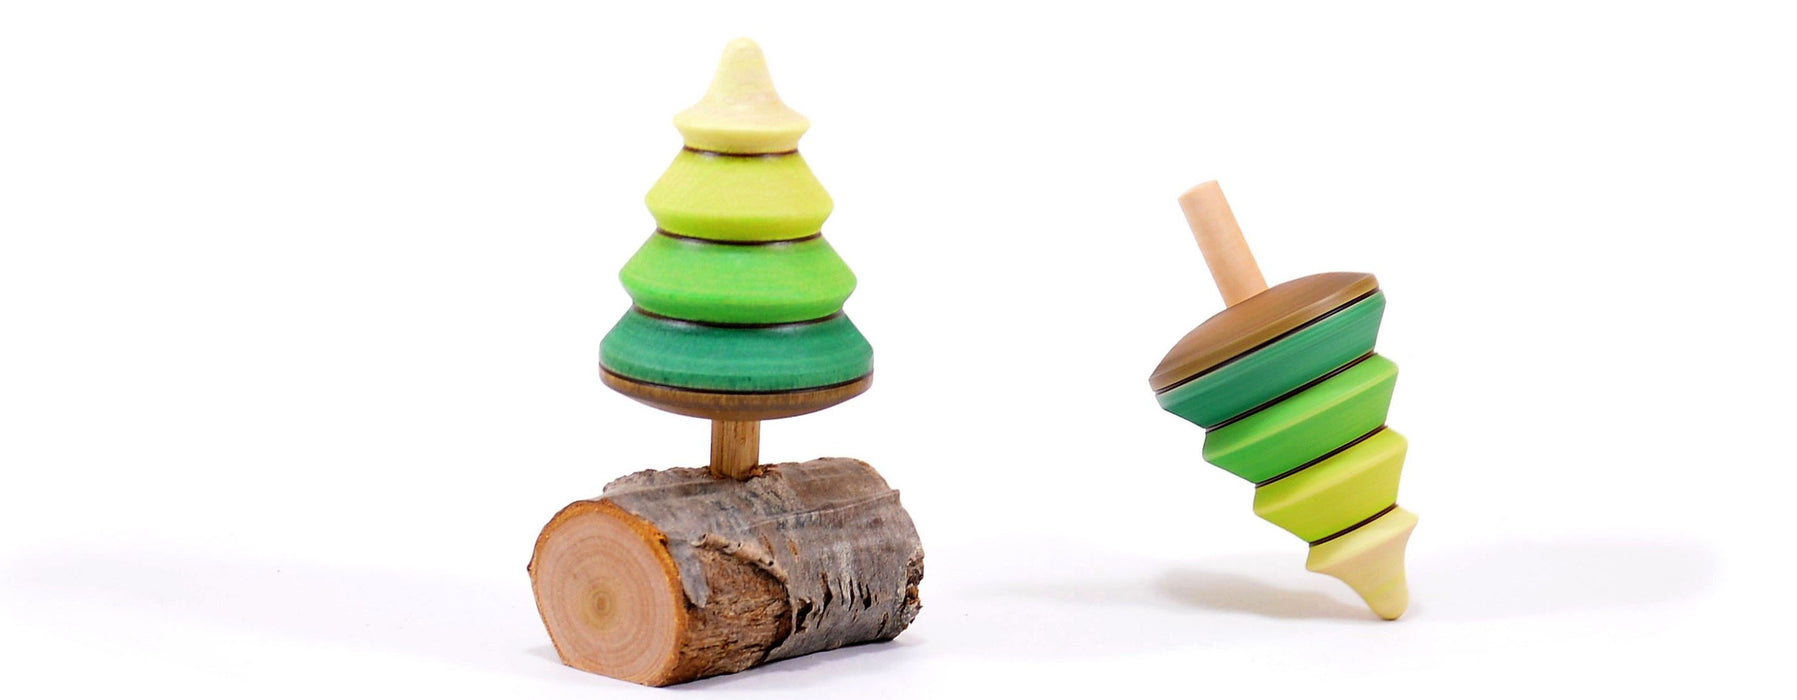 wooden top in the shape of a pine tree one on a brach base and one spinning on its top